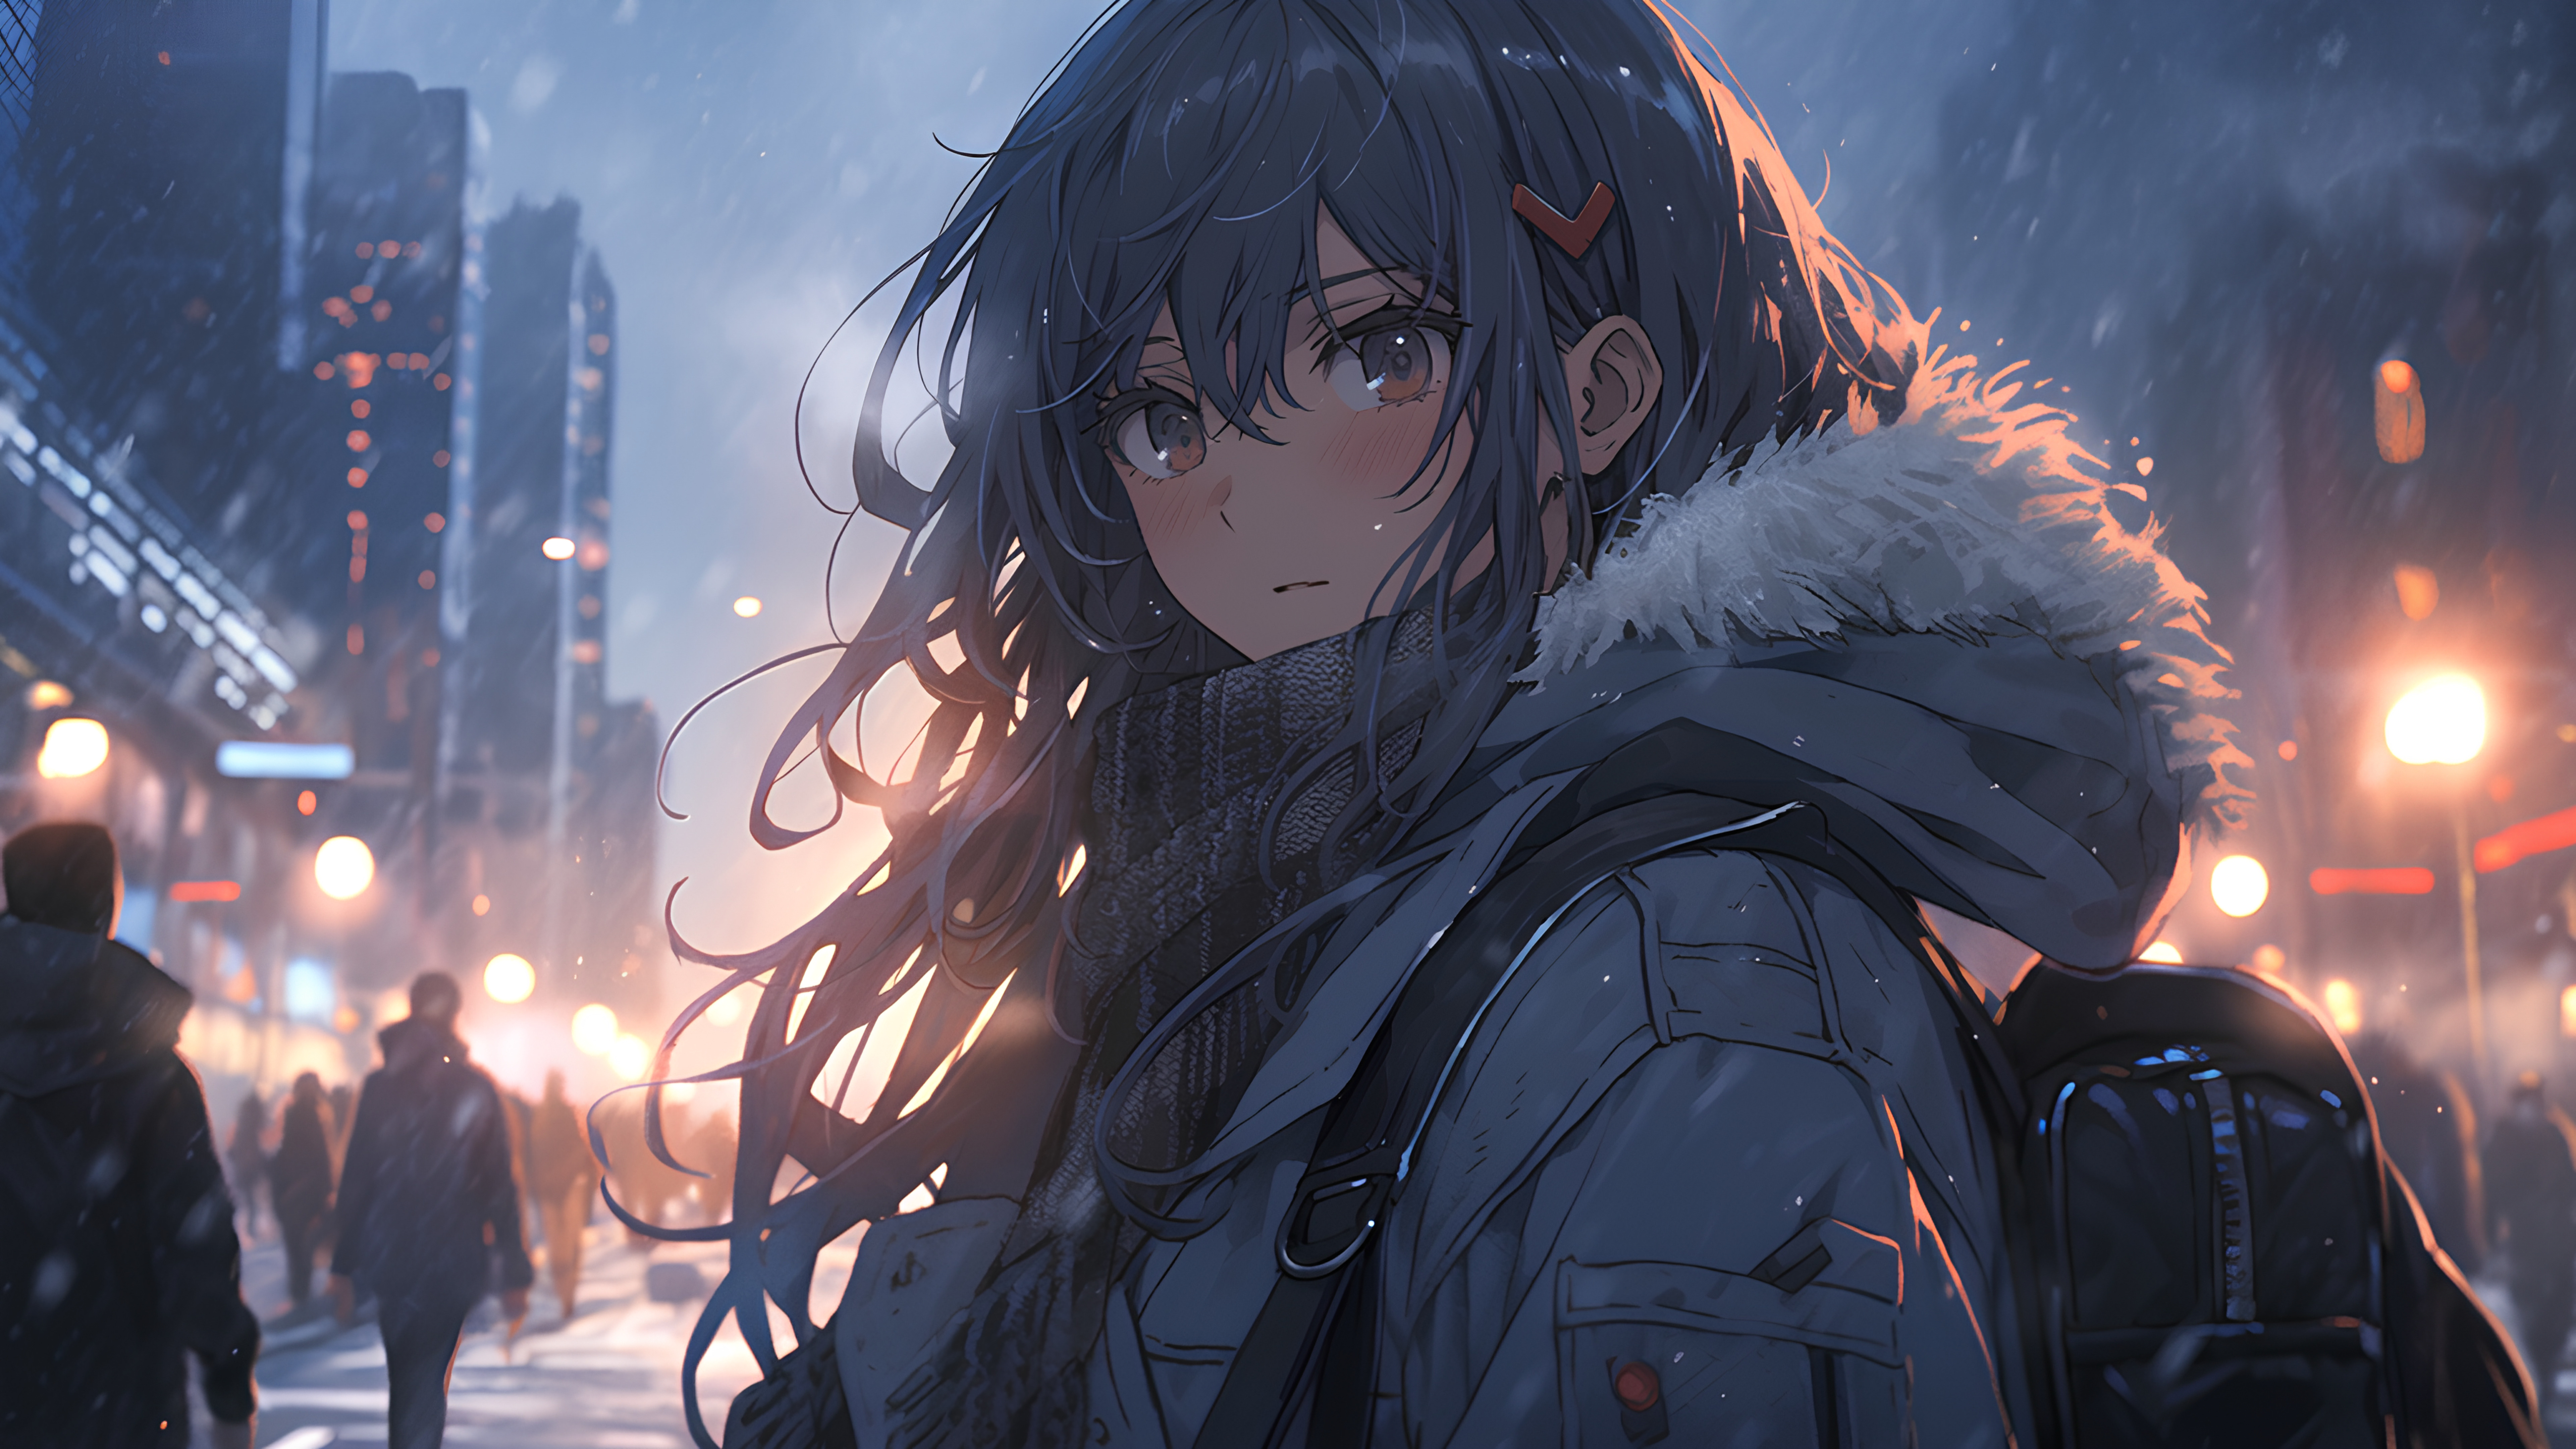 Anime 7680x4320 anime girls drawing looking at viewer digital art backpacks blurred blurry background standing lights city city lights blushing long hair street light closed mouth scarf coats hairpins snow brown eyes